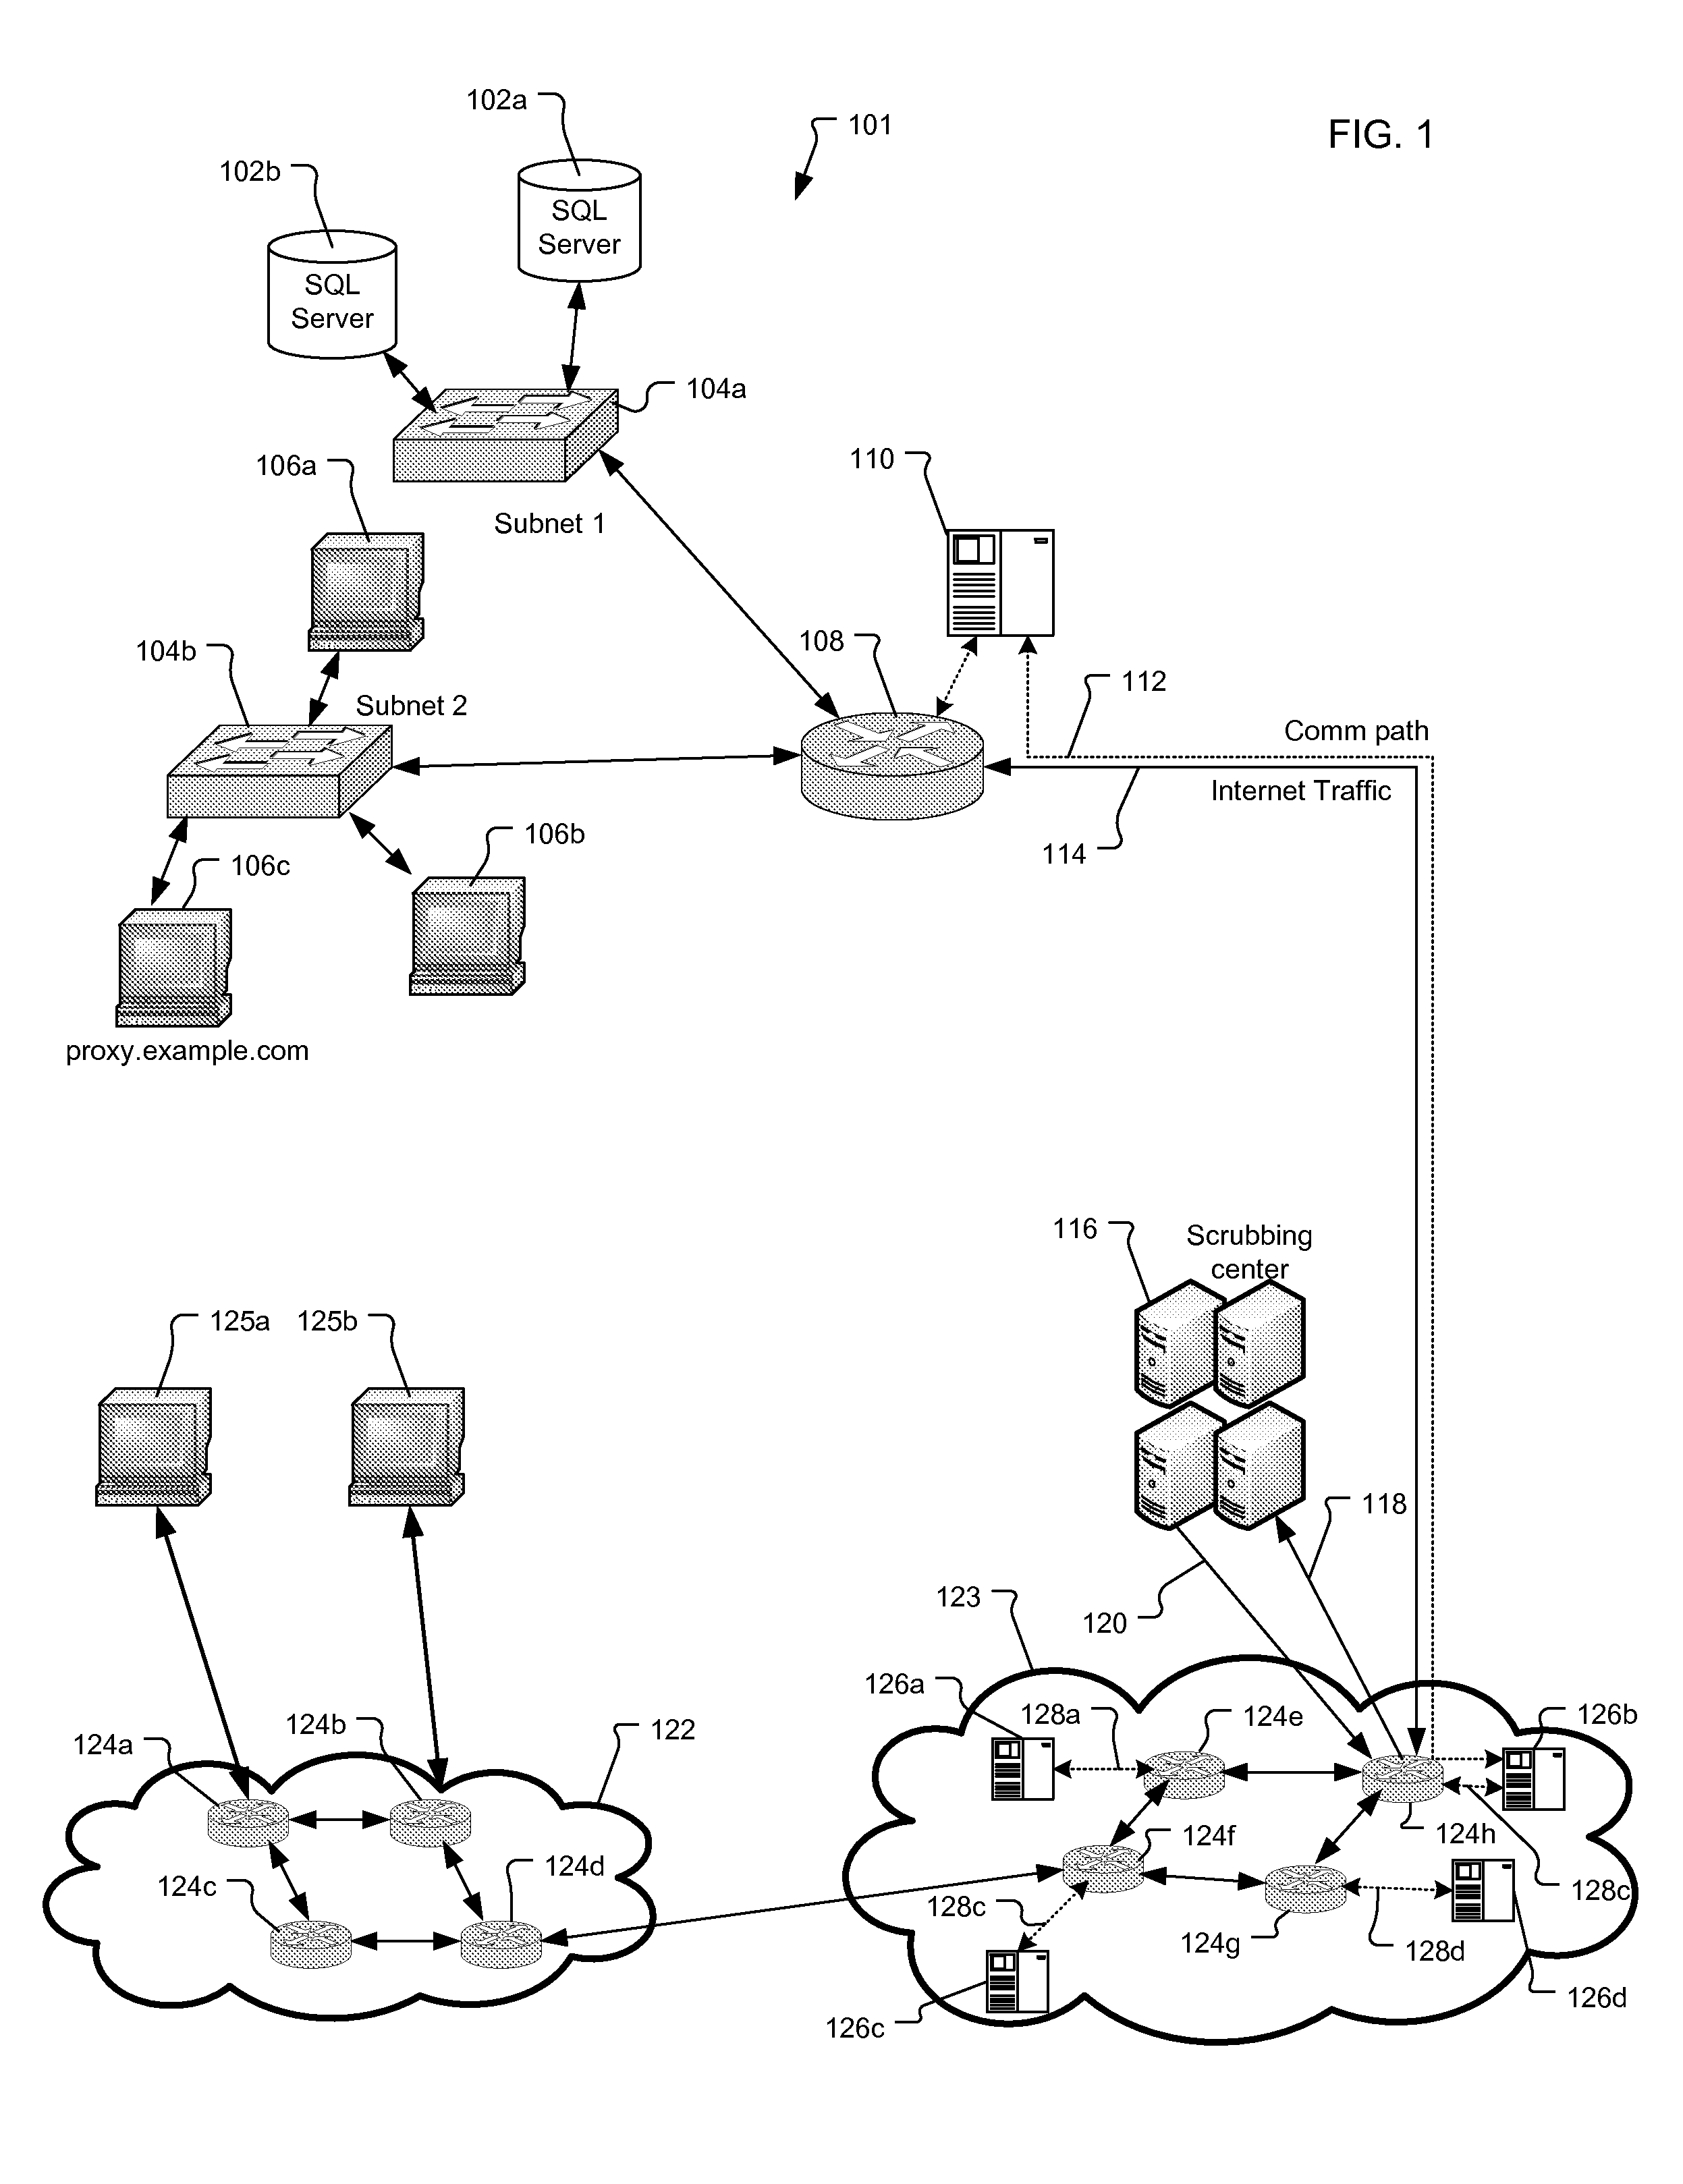 System and Method for Denial of Service Attack Mitigation Using Cloud Services